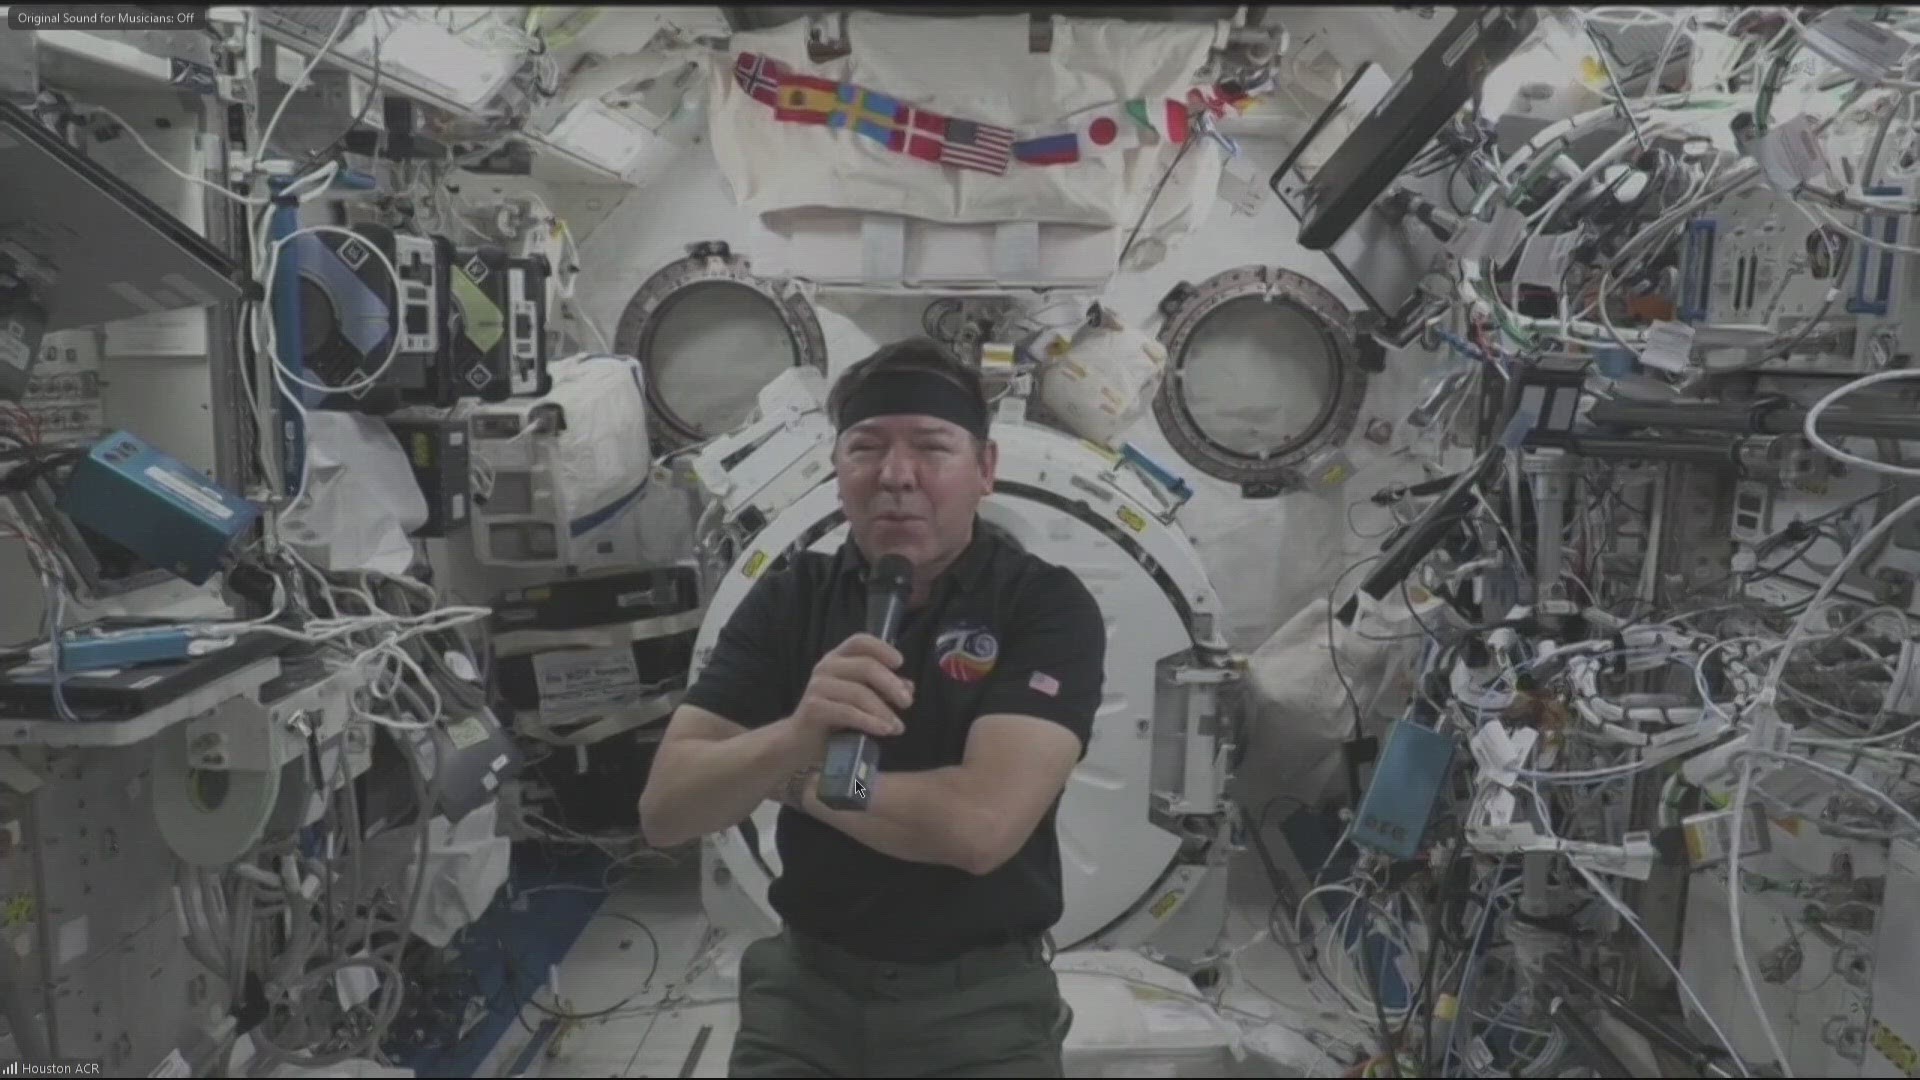 This is Dr. Michael Barratt's third trip to the ISS, having previously gone into orbit in 2009 and 2011.